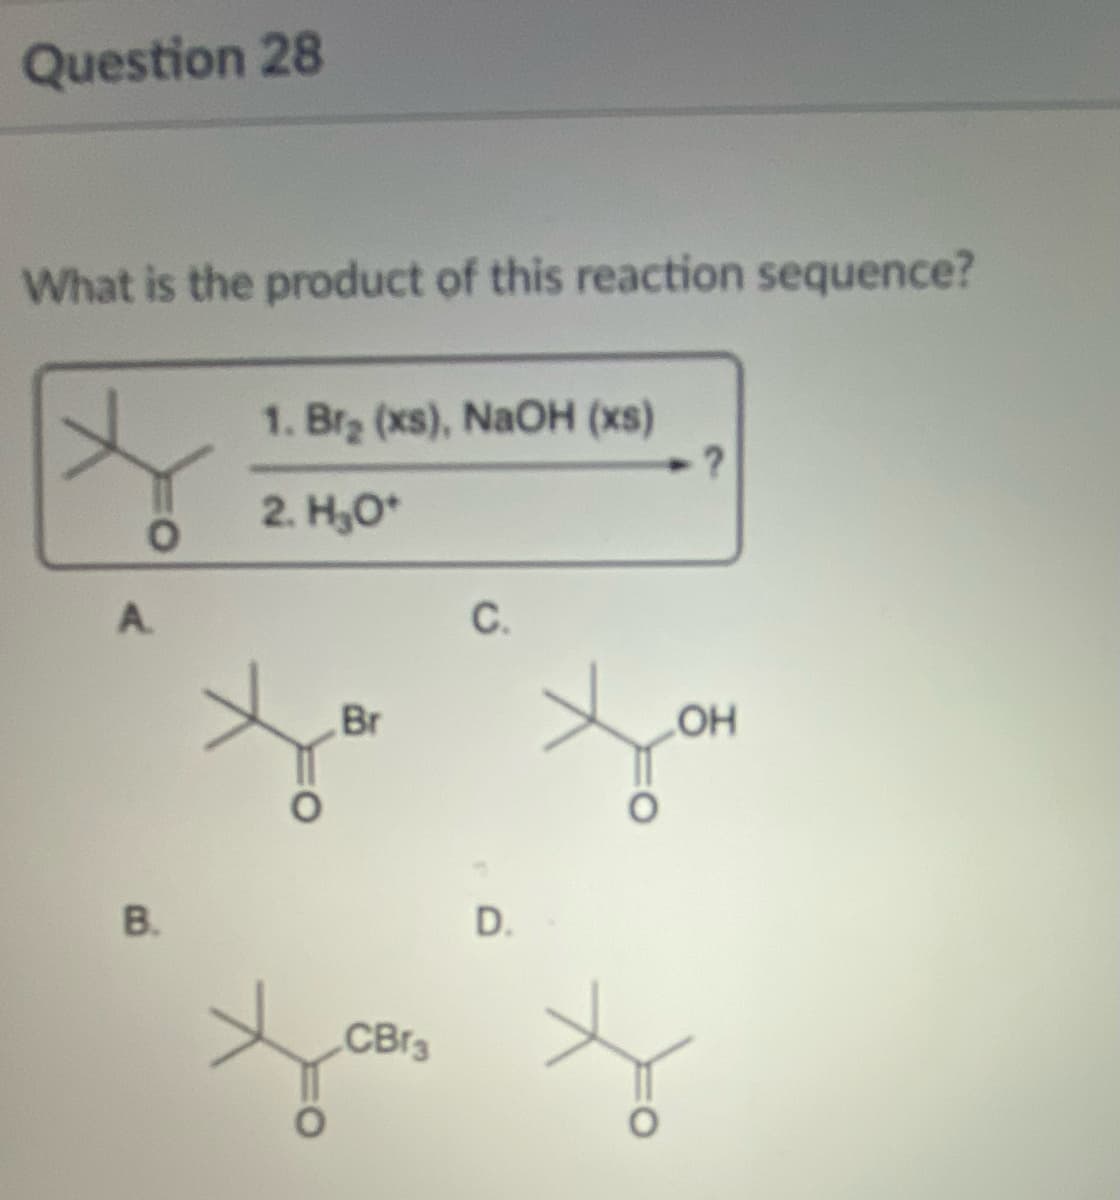 Question 28
What is the product of this reaction sequence?
O
A
B.
1. Br₂ (xs), NaOH (xs)
2. H₂O*
Br
CBr3
C.
D.
?
OH